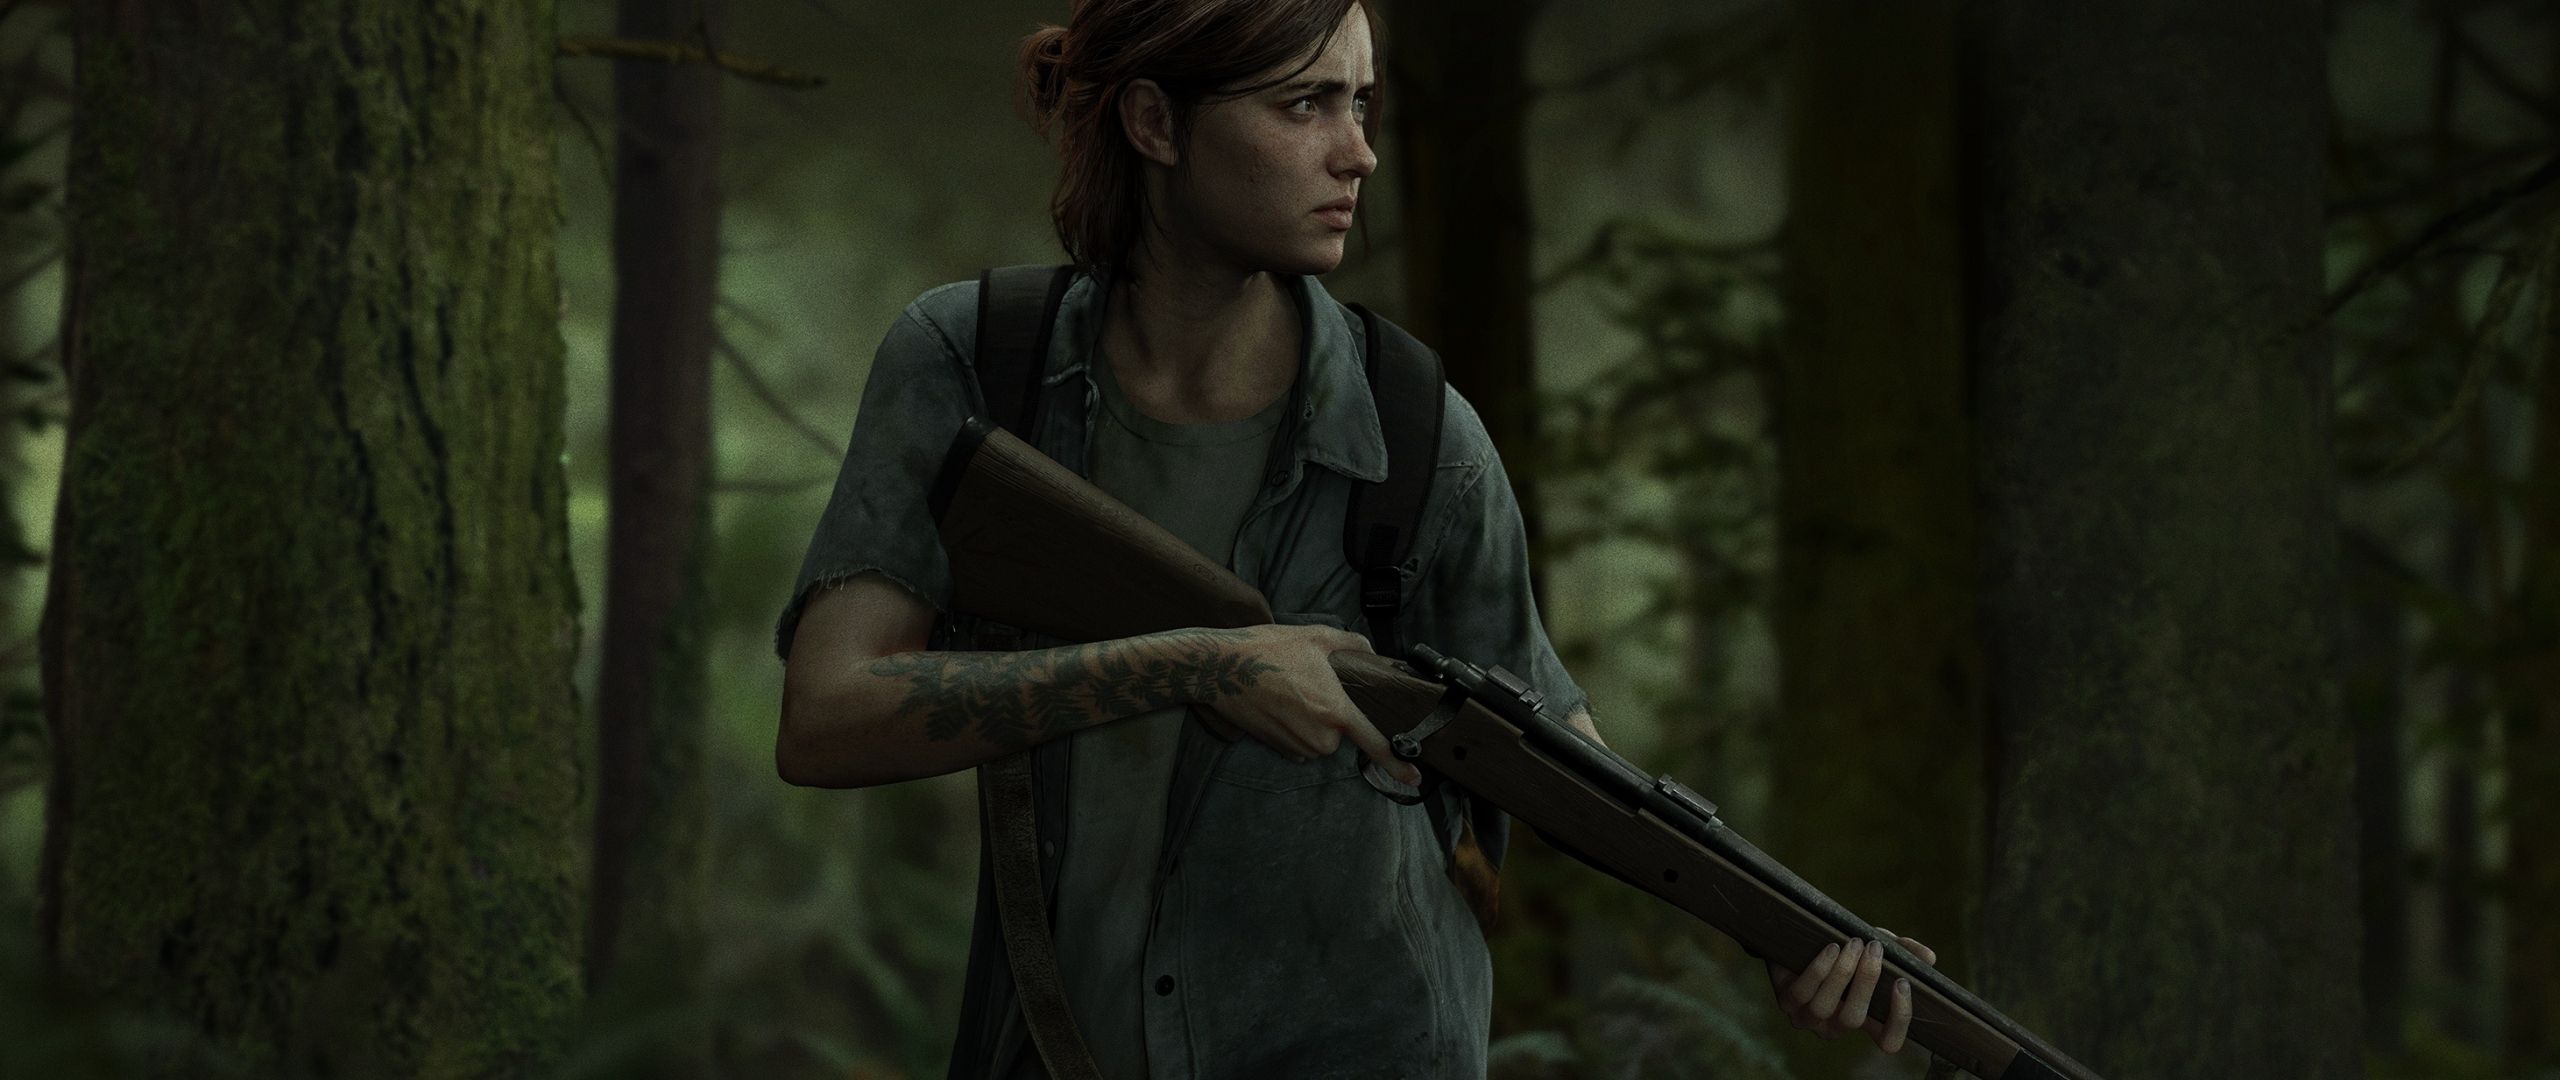 Download 2560x1080 wallpaper the last of us, ellie, outbreak day, dual wide, widescreen, 2560x1080 HD image, background, 15278